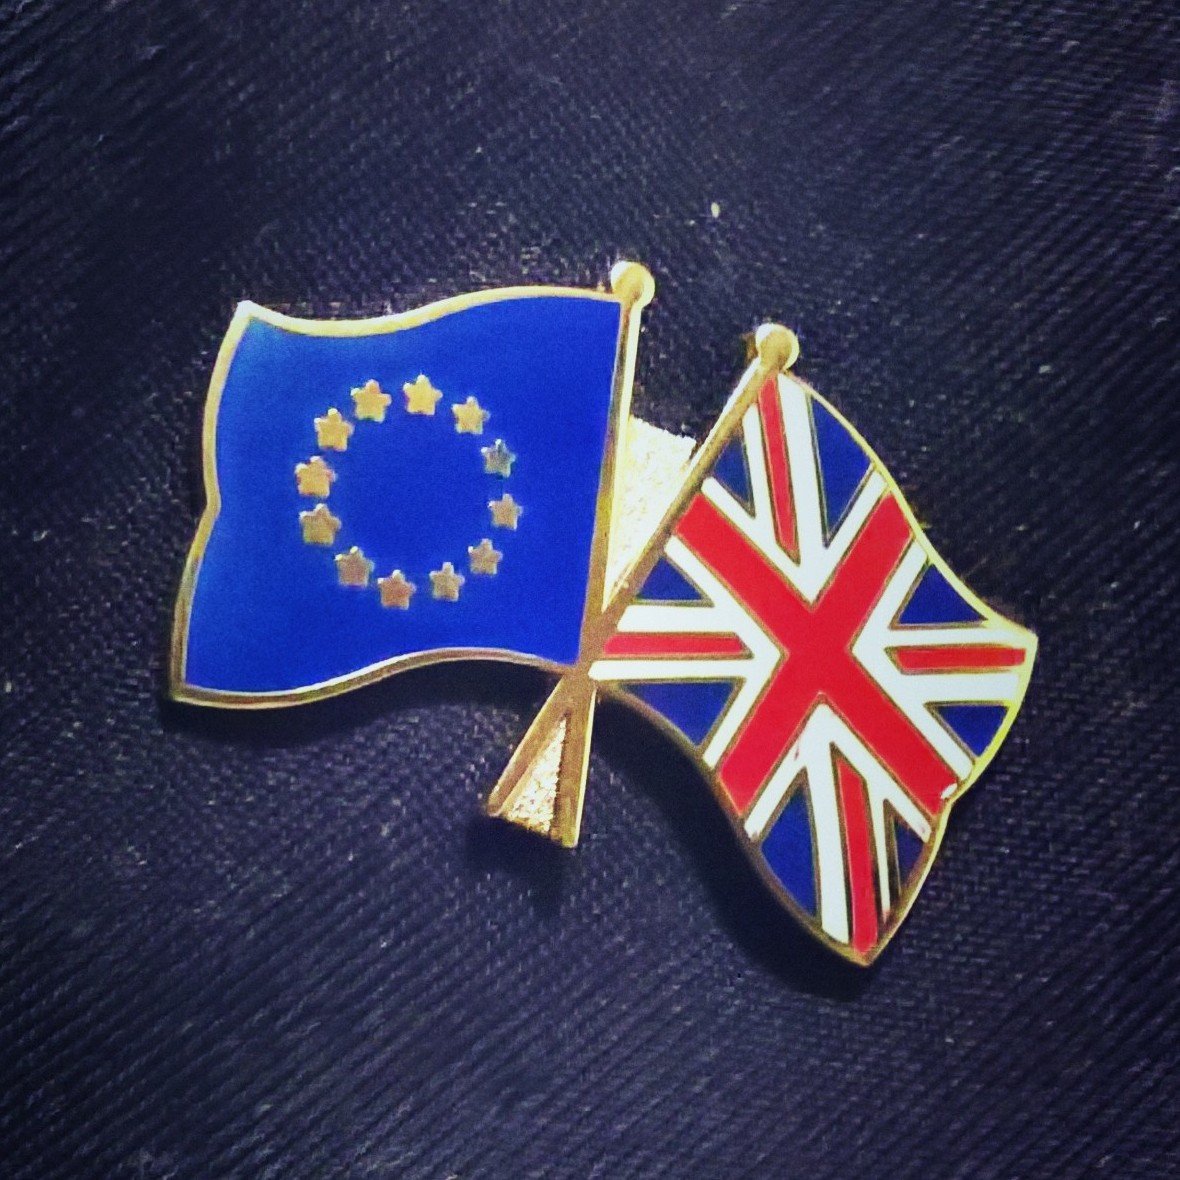 Retired Finance/Treasury Manager.
Proudly British, EU, Multicultural, Woke. United We Stand. #FBPE. #Remain. #BrexitHasFailed. Jail #BrexitJihadi conspirators.